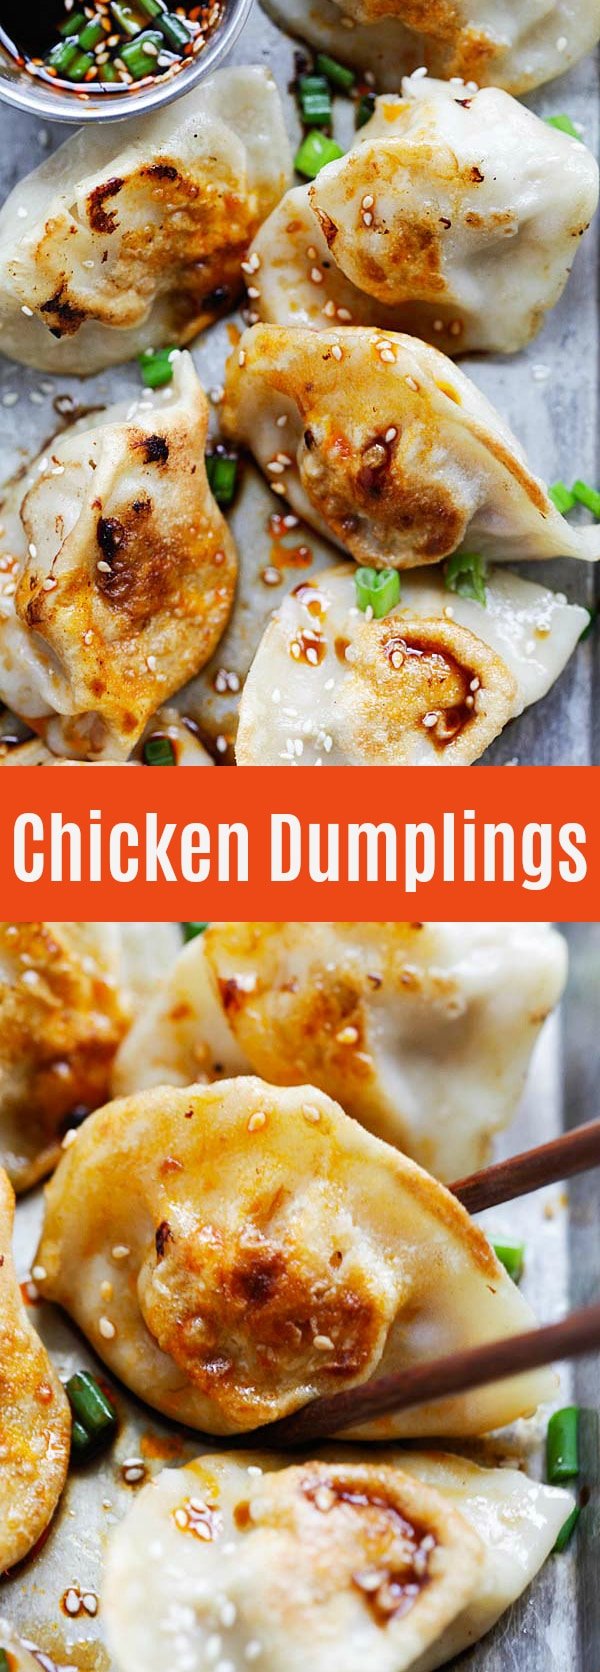 Chicken Dumplings - Chinese dumplings with ground chicken and vegetables. Homemade dumplings are healthy and great as a light meal for apppetizer | rasamalaysia.com